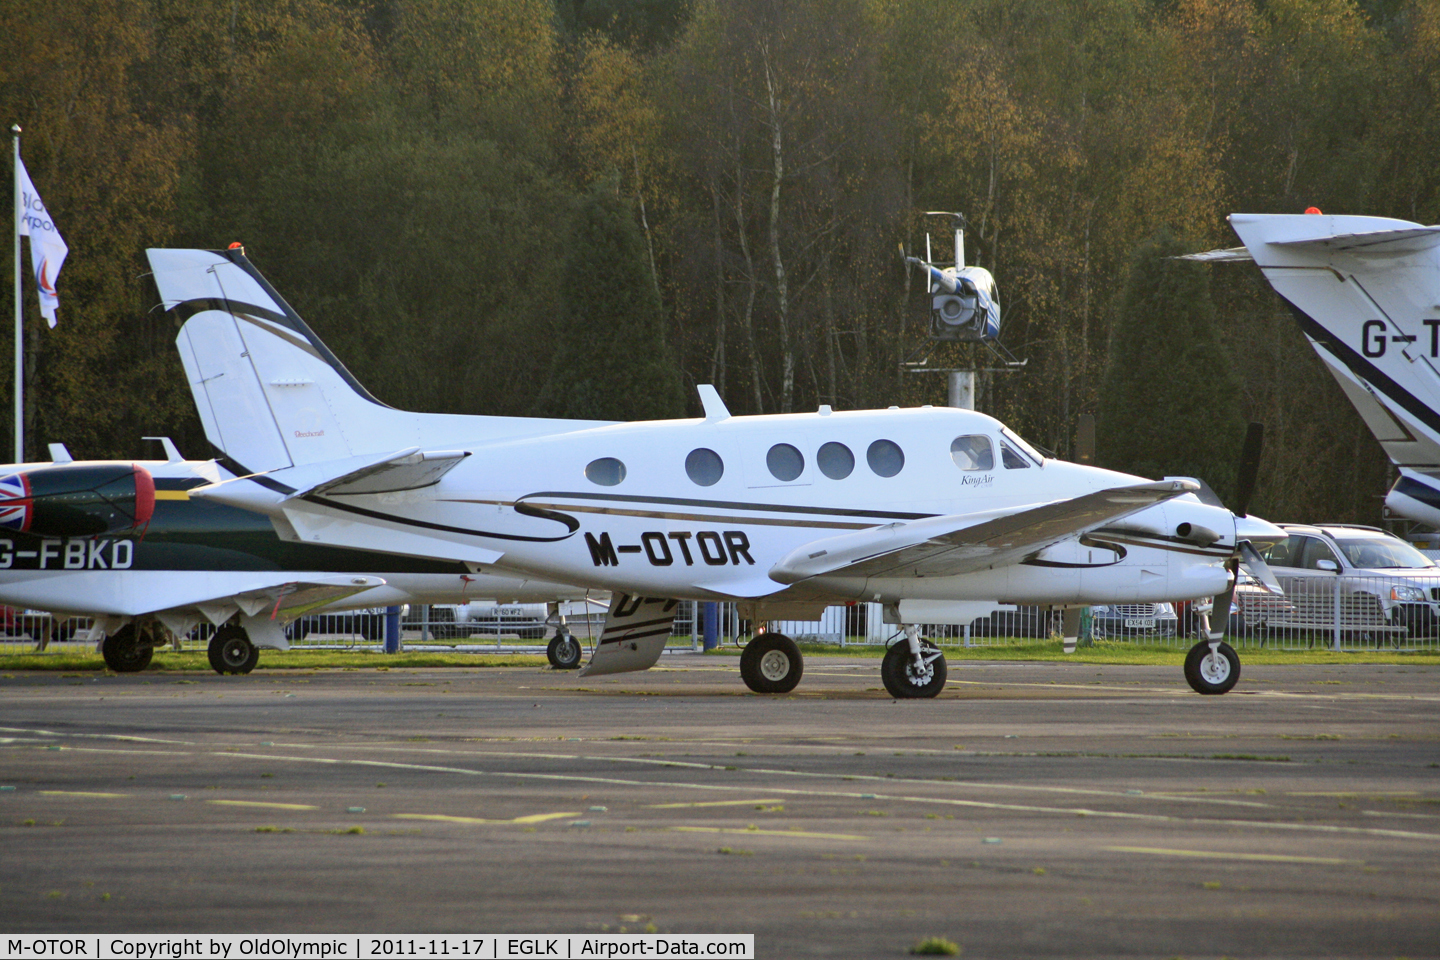 M-OTOR, 2005 Beech C90A King Air C/N LJ-1733, Parked on arrival